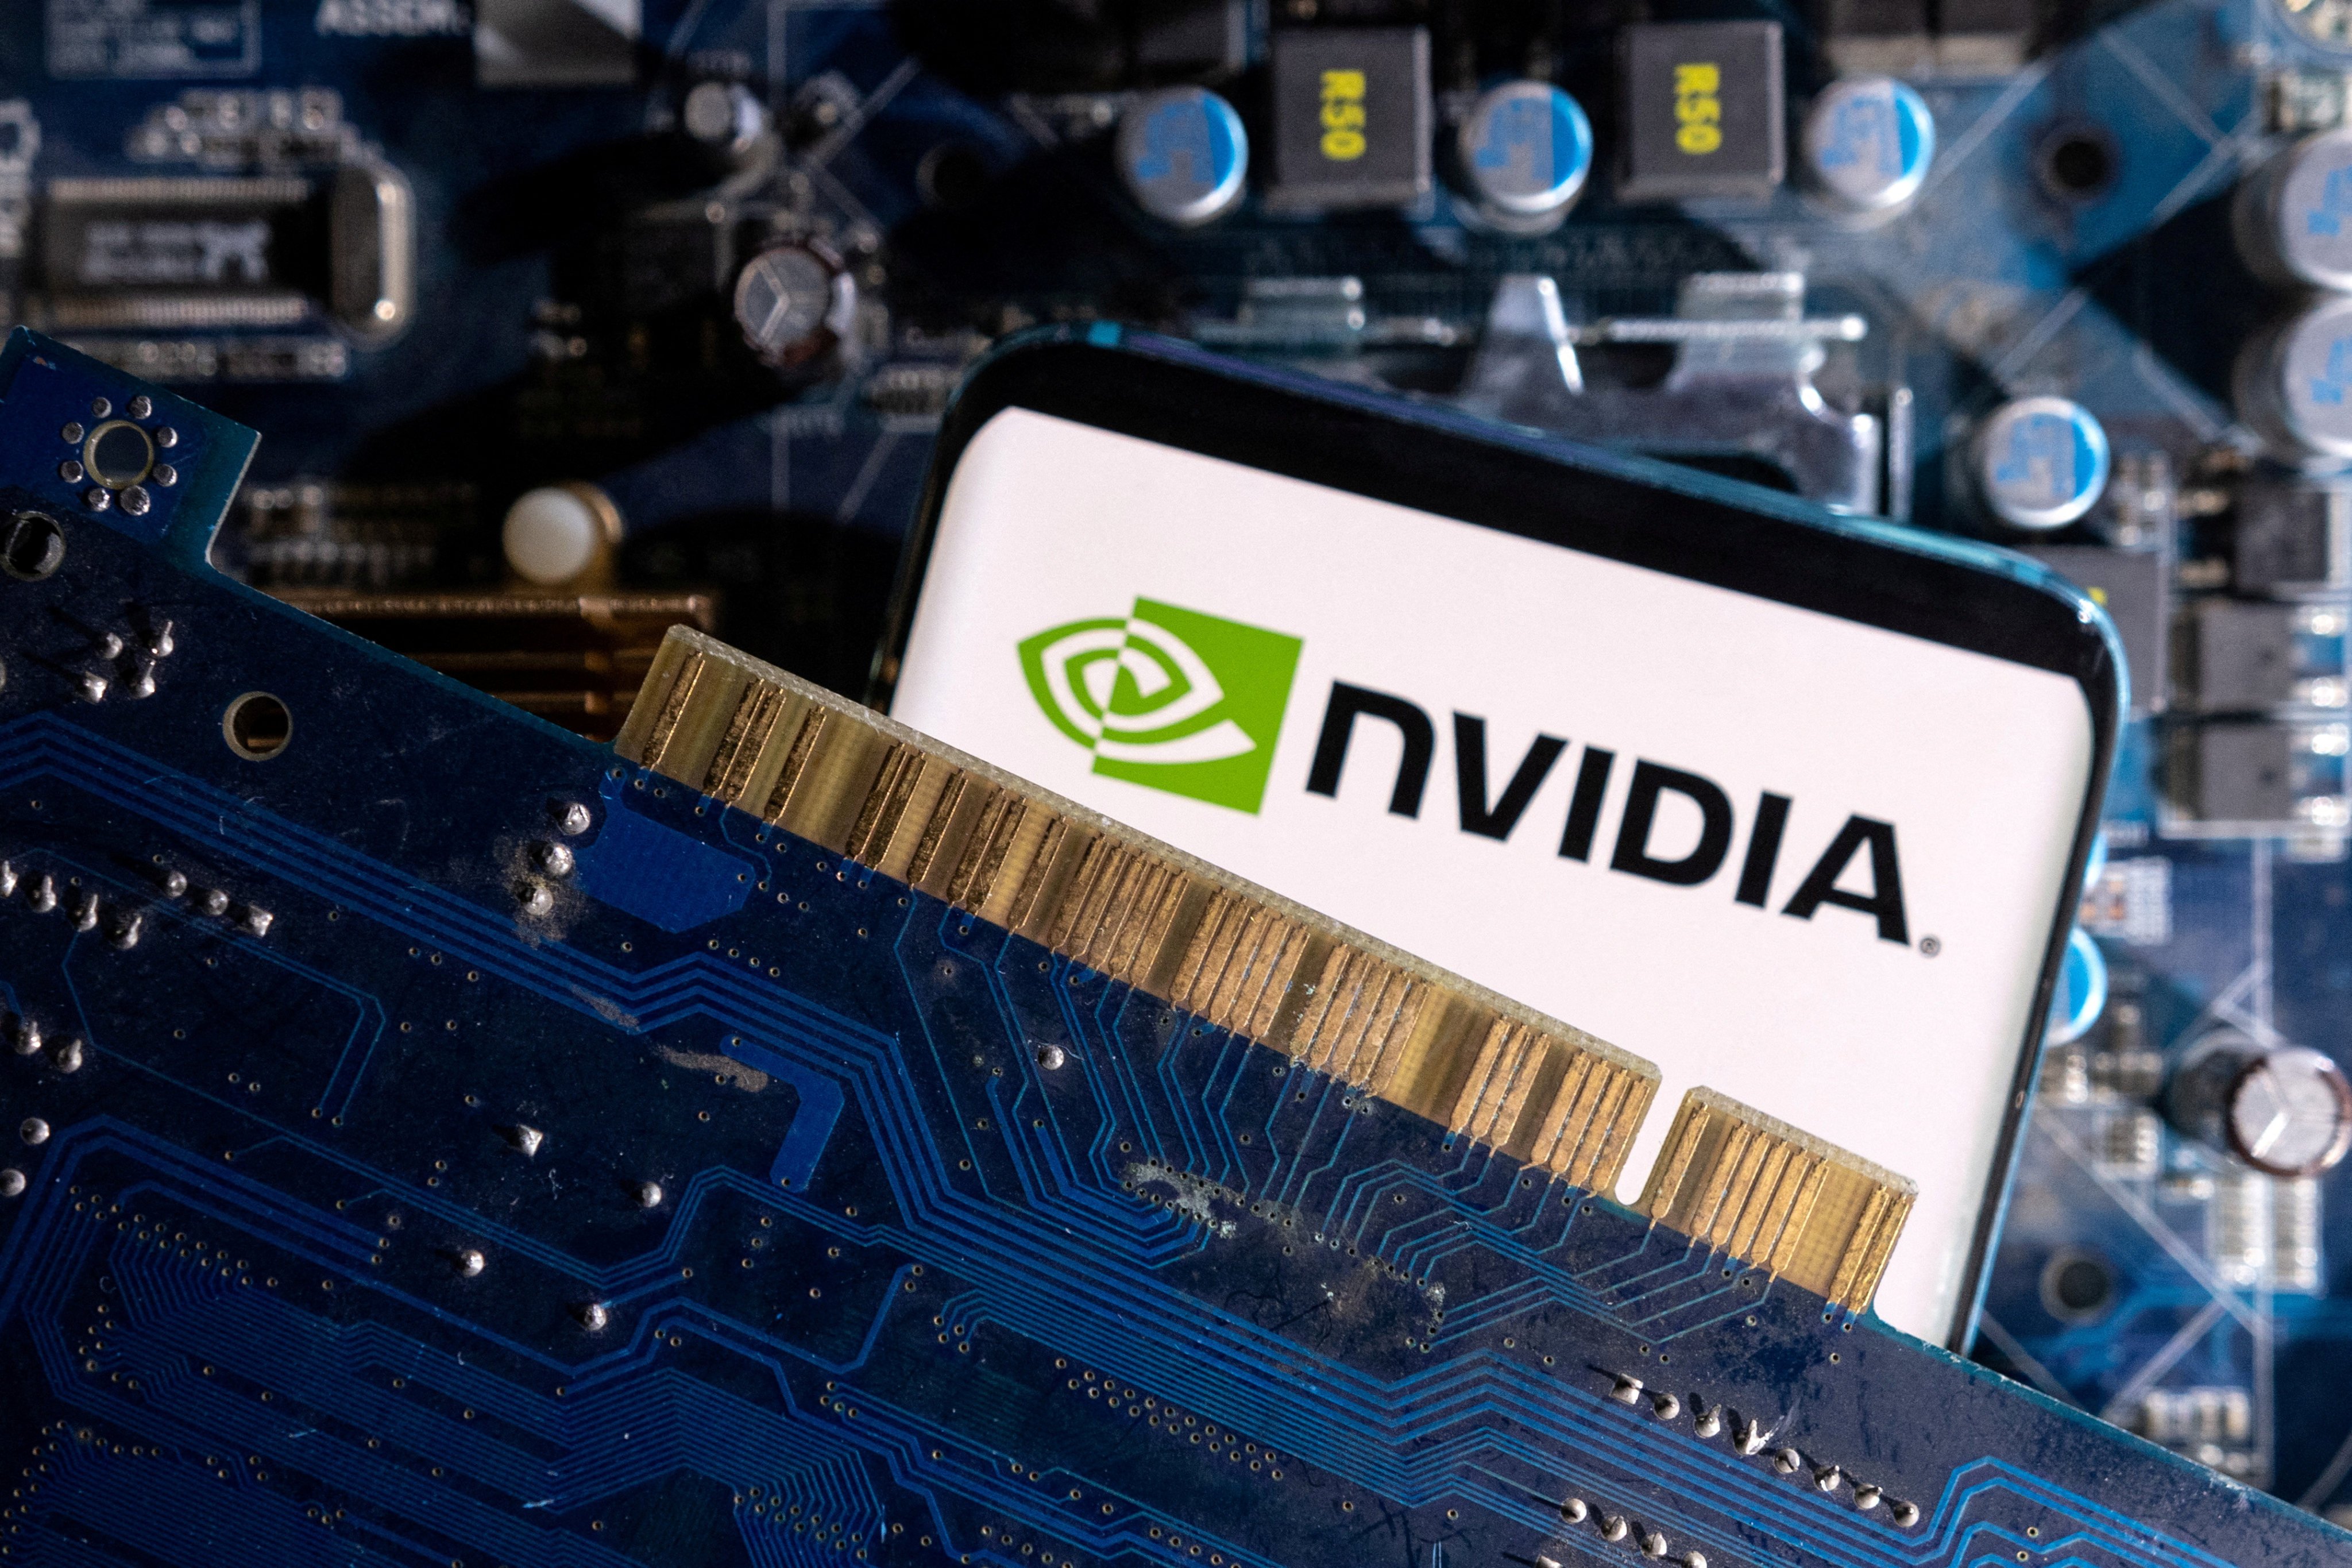 New licensing requirements from the US expand export restrictions on Nvidia’s leading AI chips to some countries in the Middle East. Photo: Reuters